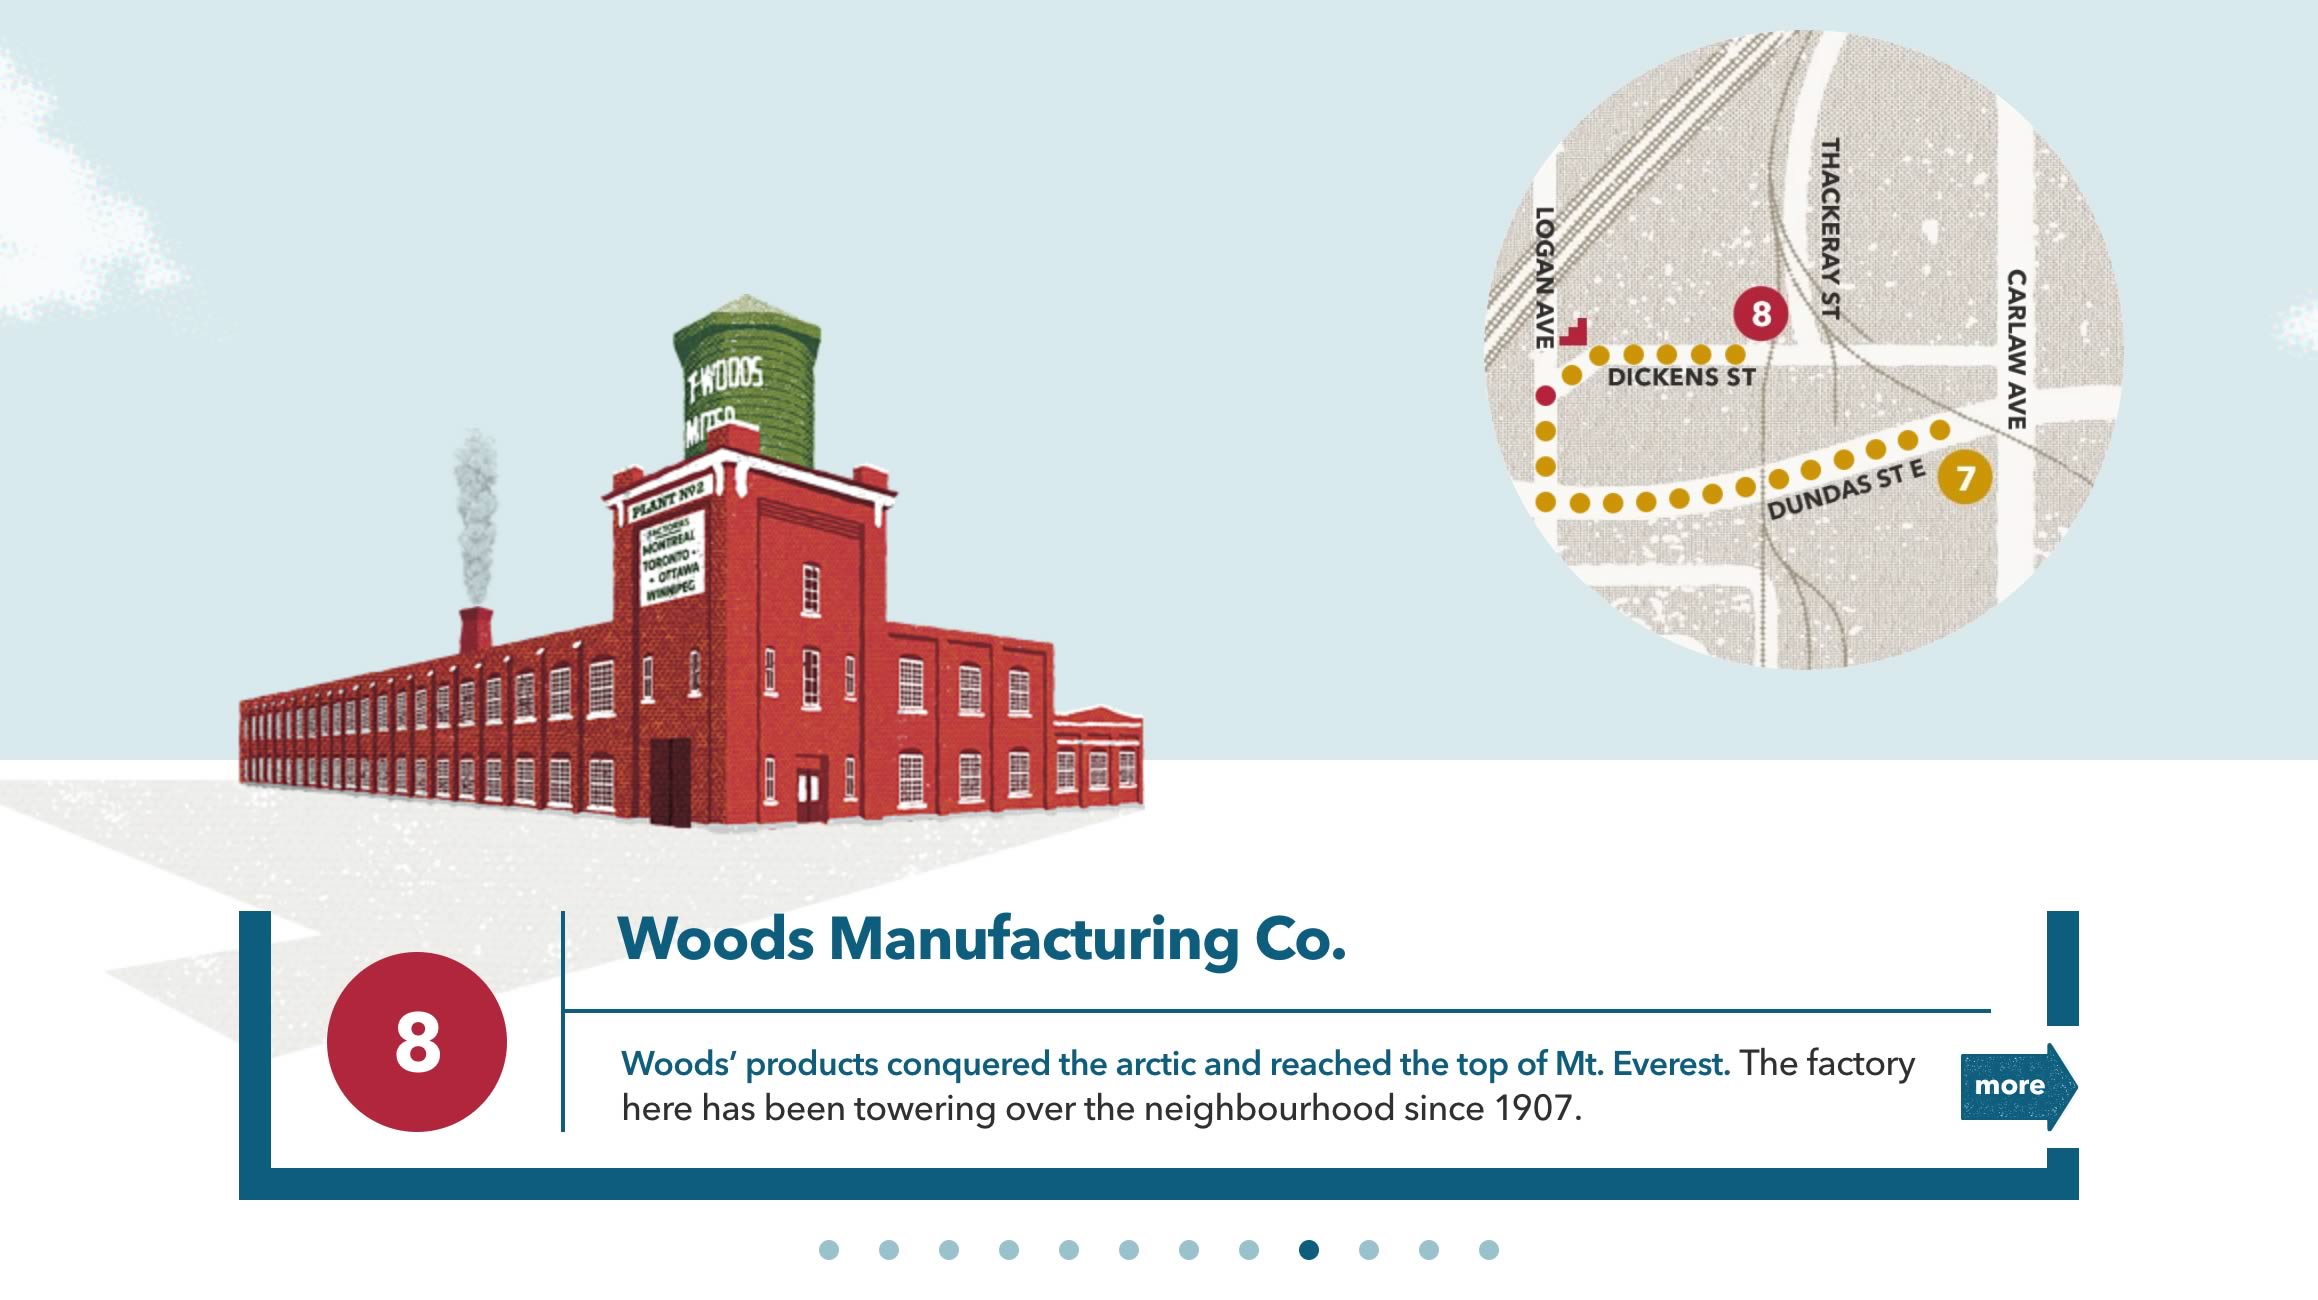 Capture of the homepage tour navigation modal window from the Made in Toronto tour/website ('Woods Manufacturing Co.' stop displayed)